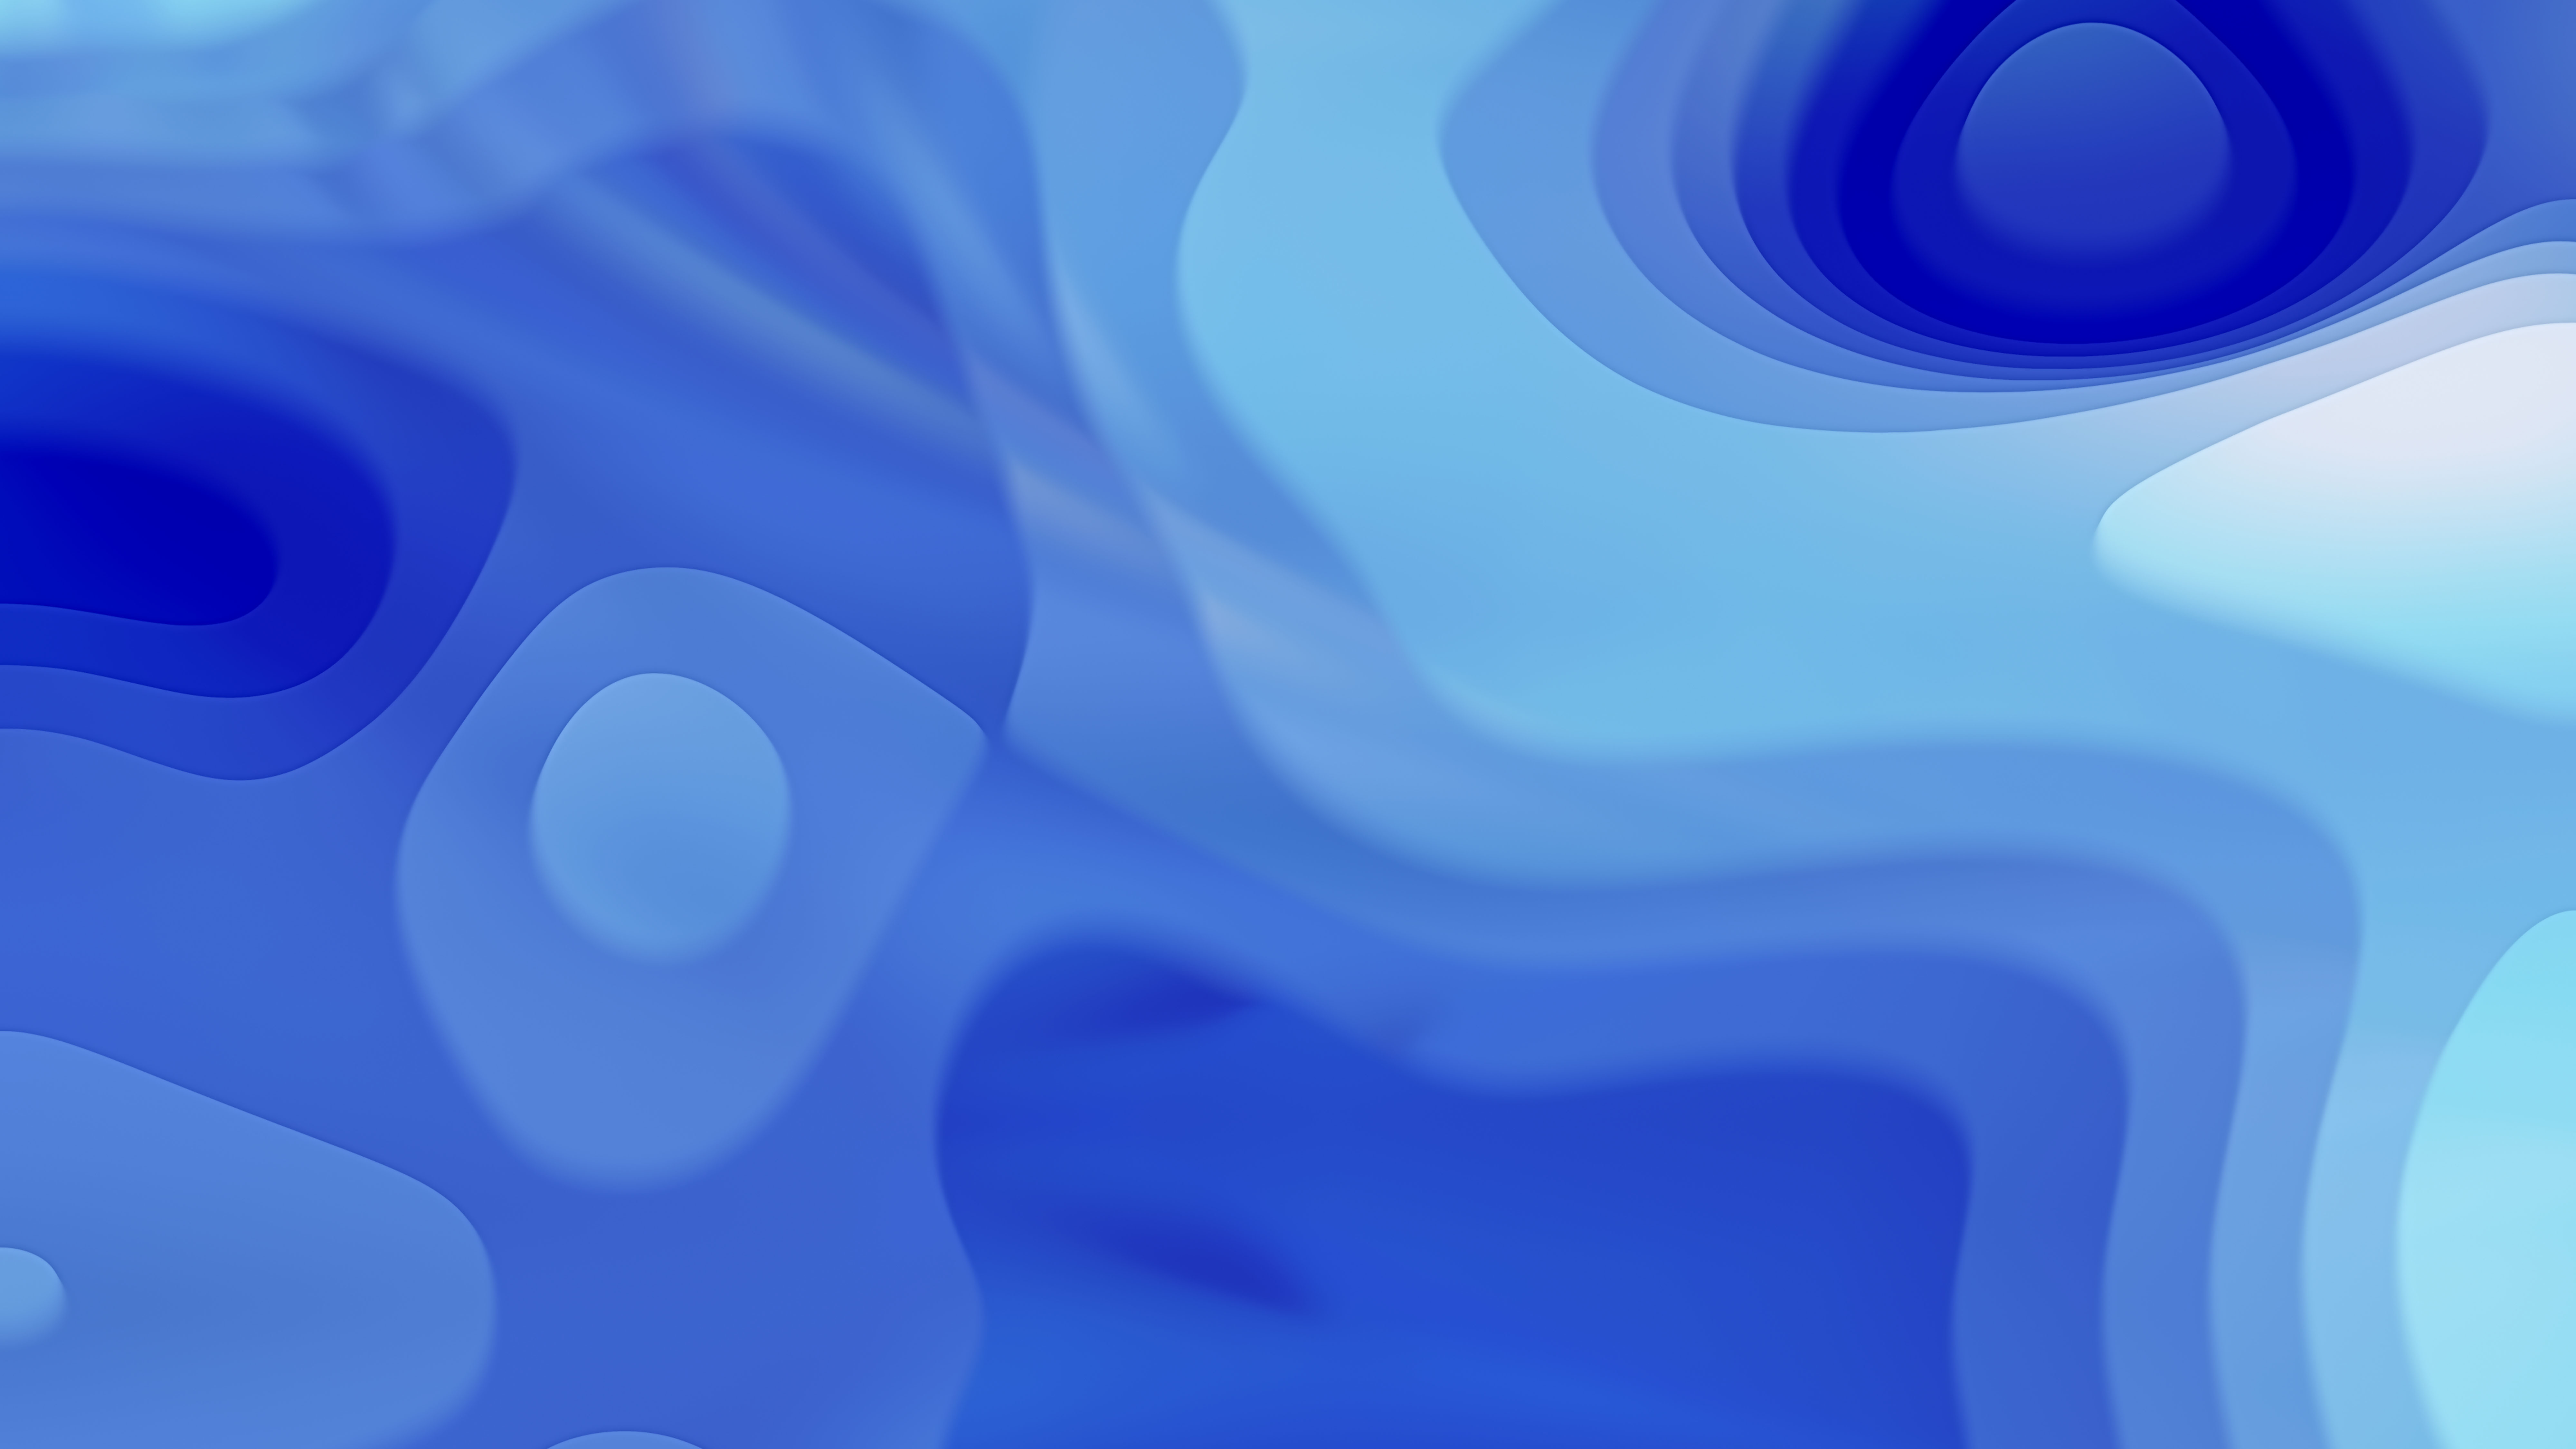 Free Abstract Blue Texture Background Image